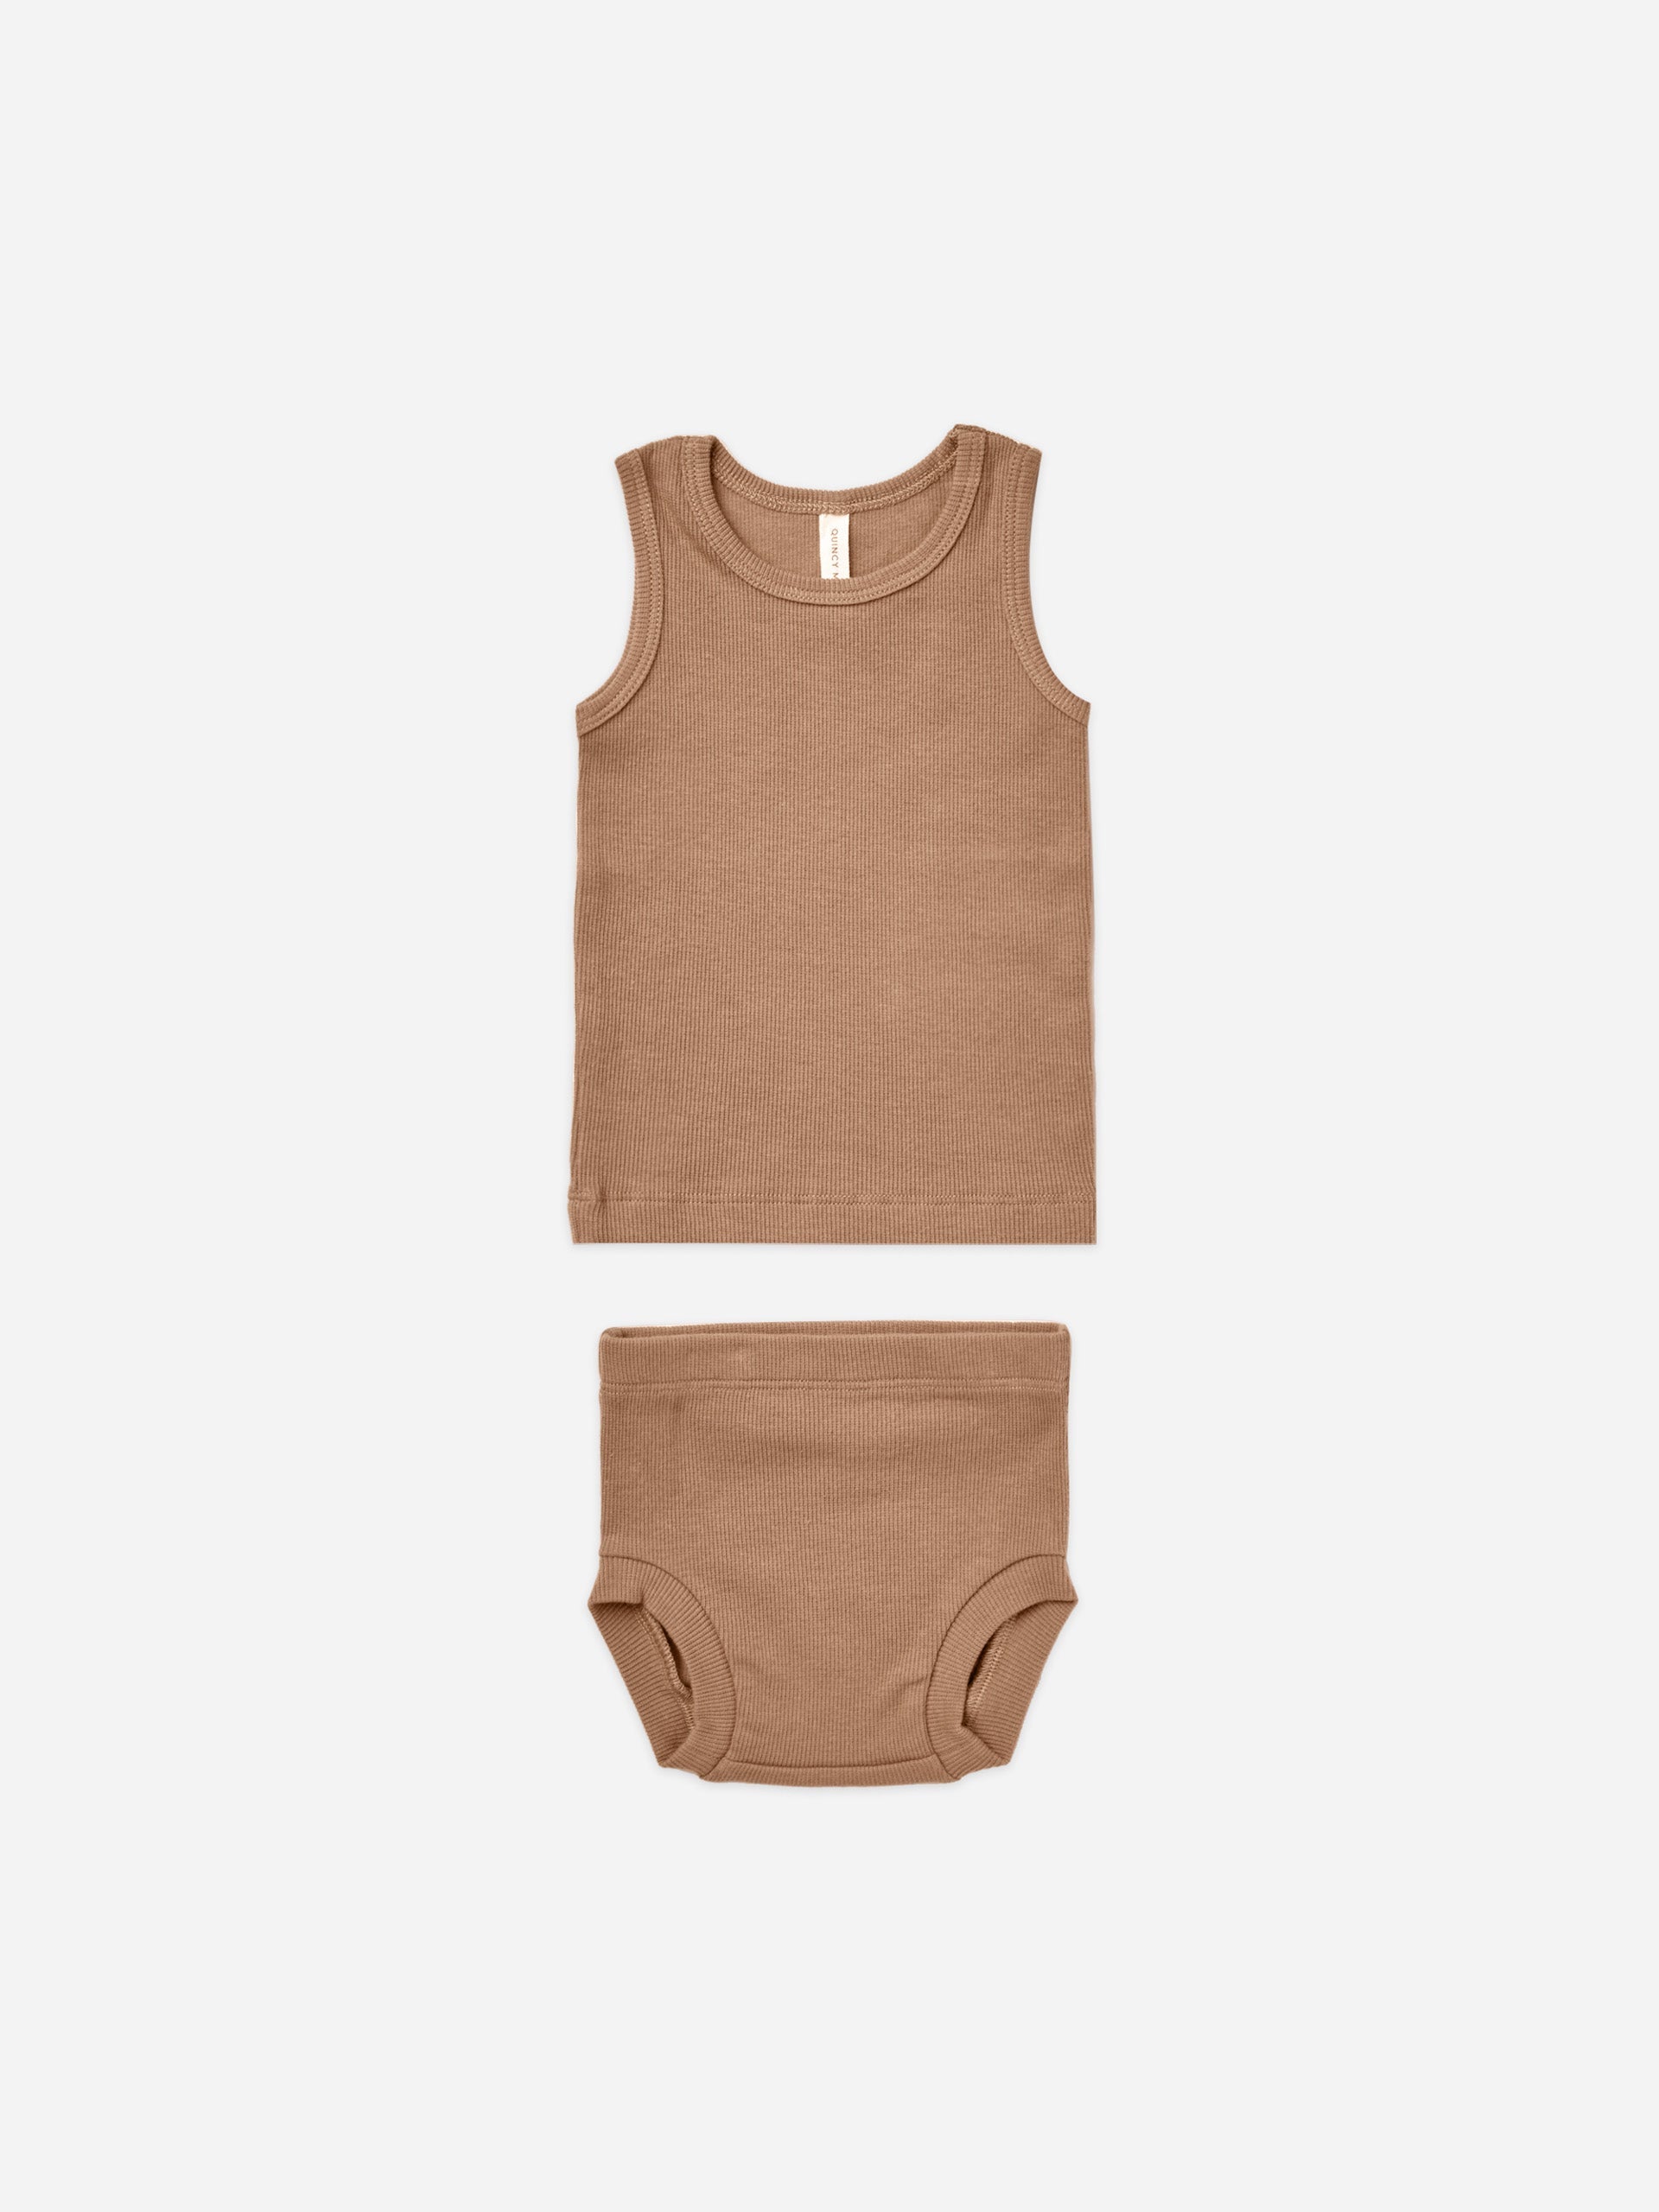 ribbed tank + bloomer set | clay - Quincy Mae | Baby Basics | Baby Clothing | Organic Baby Clothes | Modern Baby Boy Clothes |